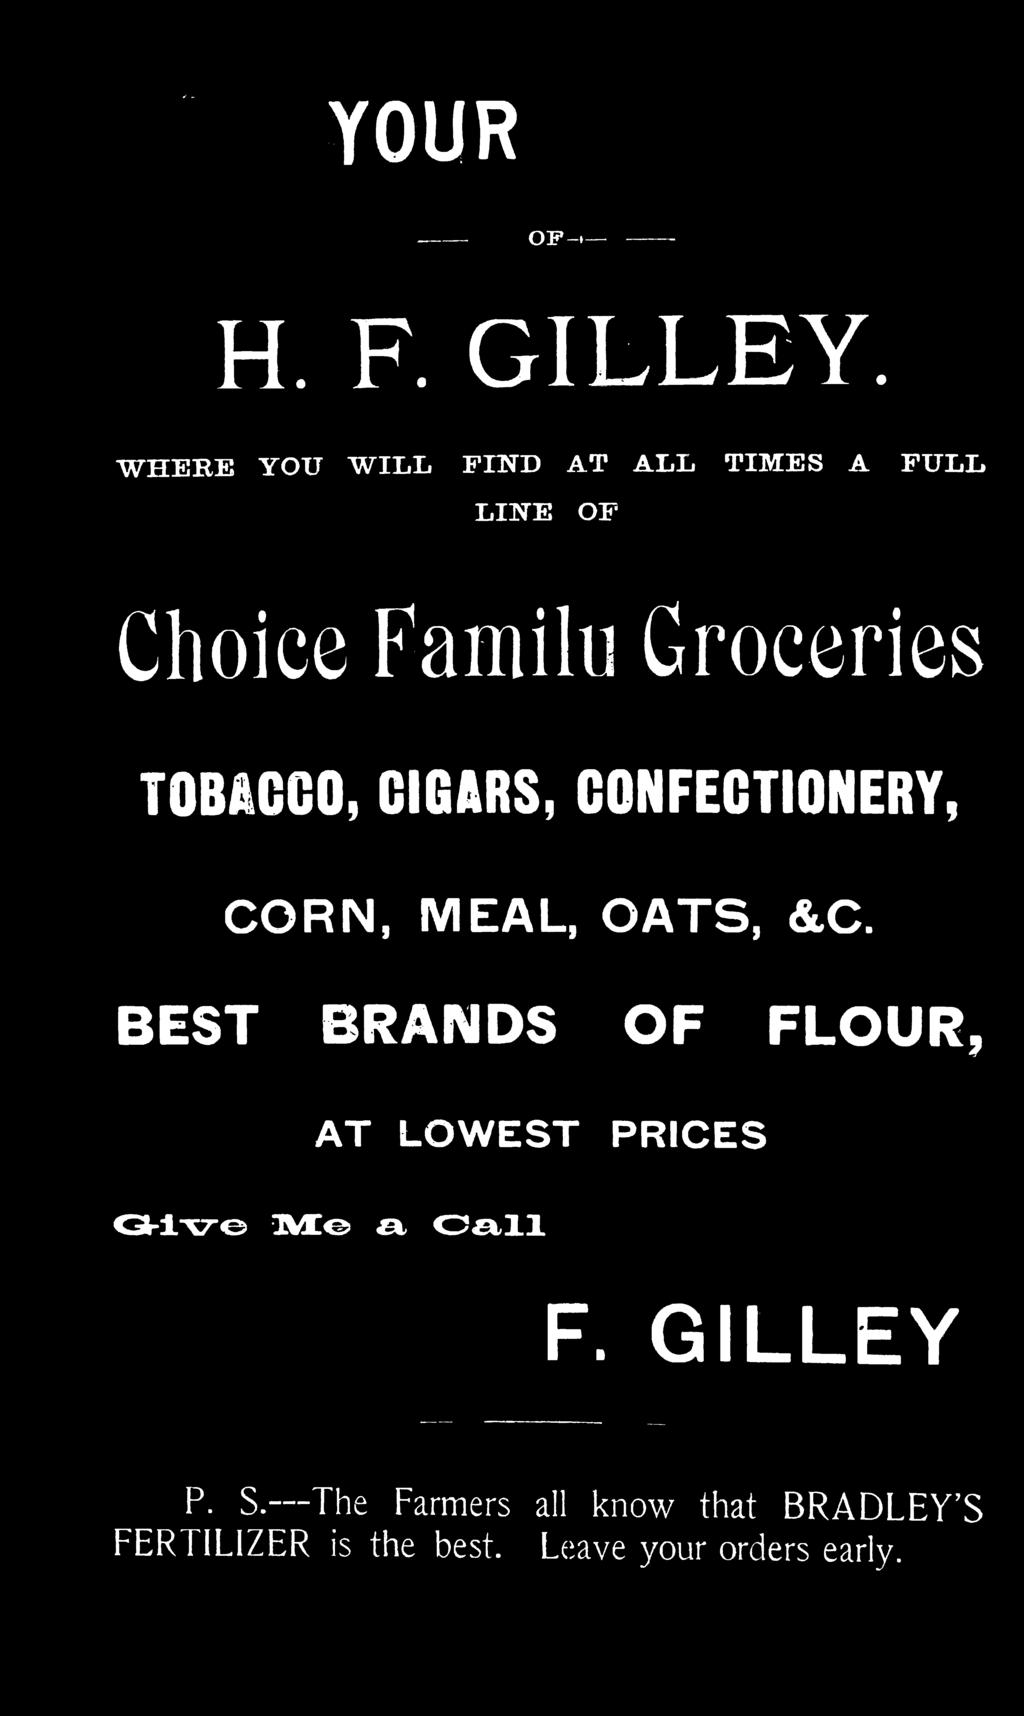 Groceries TOBACCO, CIGARS, CONFECTIONERY, CORN, MEAL, OATS, &C.